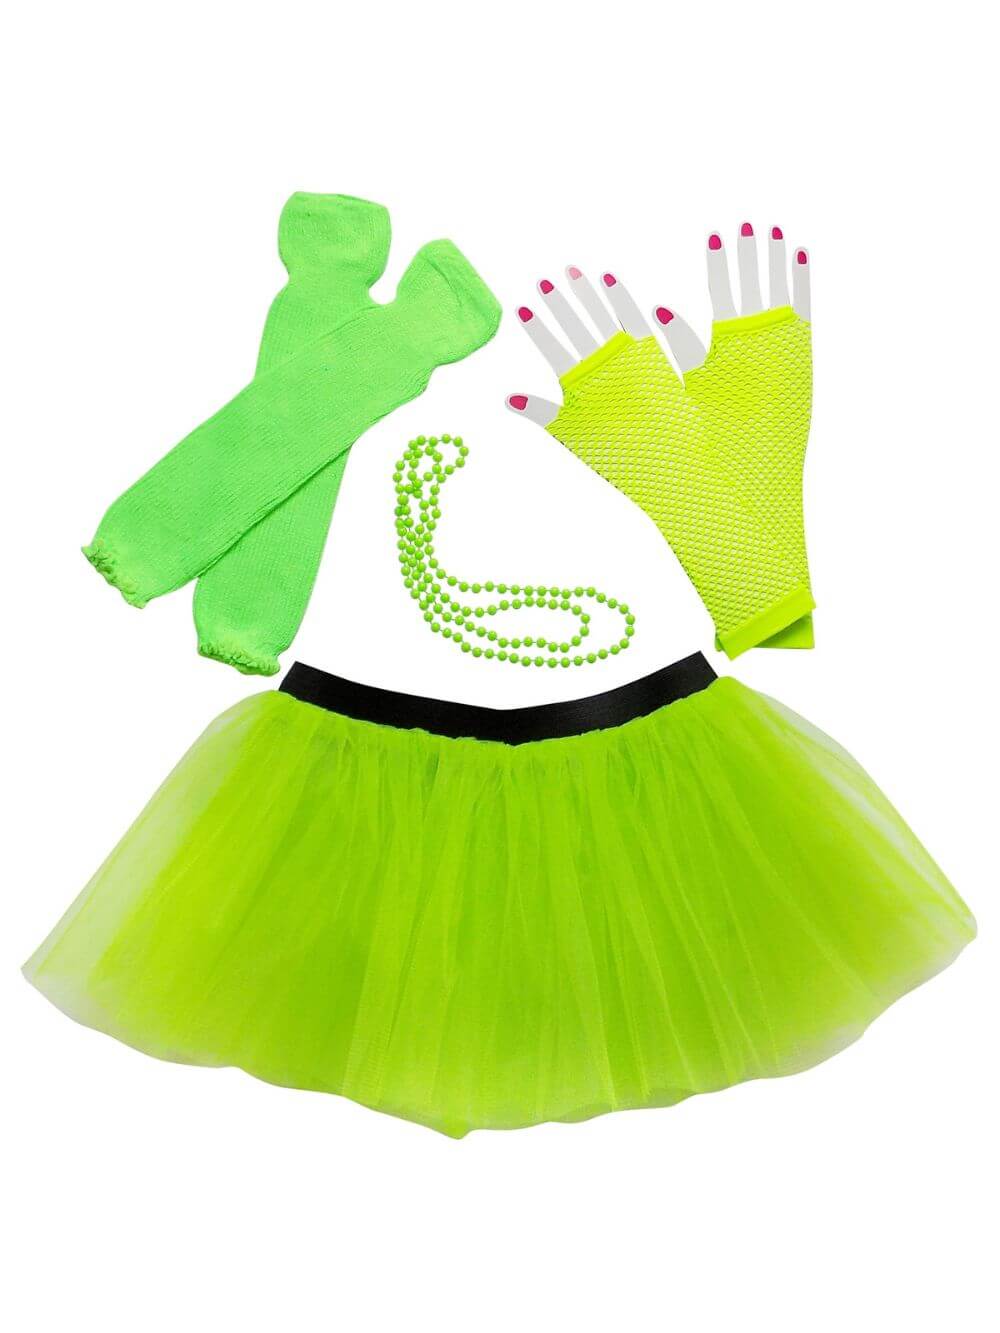 80s Costume for Teens or Women in Neon Lime Green with Tutu & Accessories - Sydney So Sweet